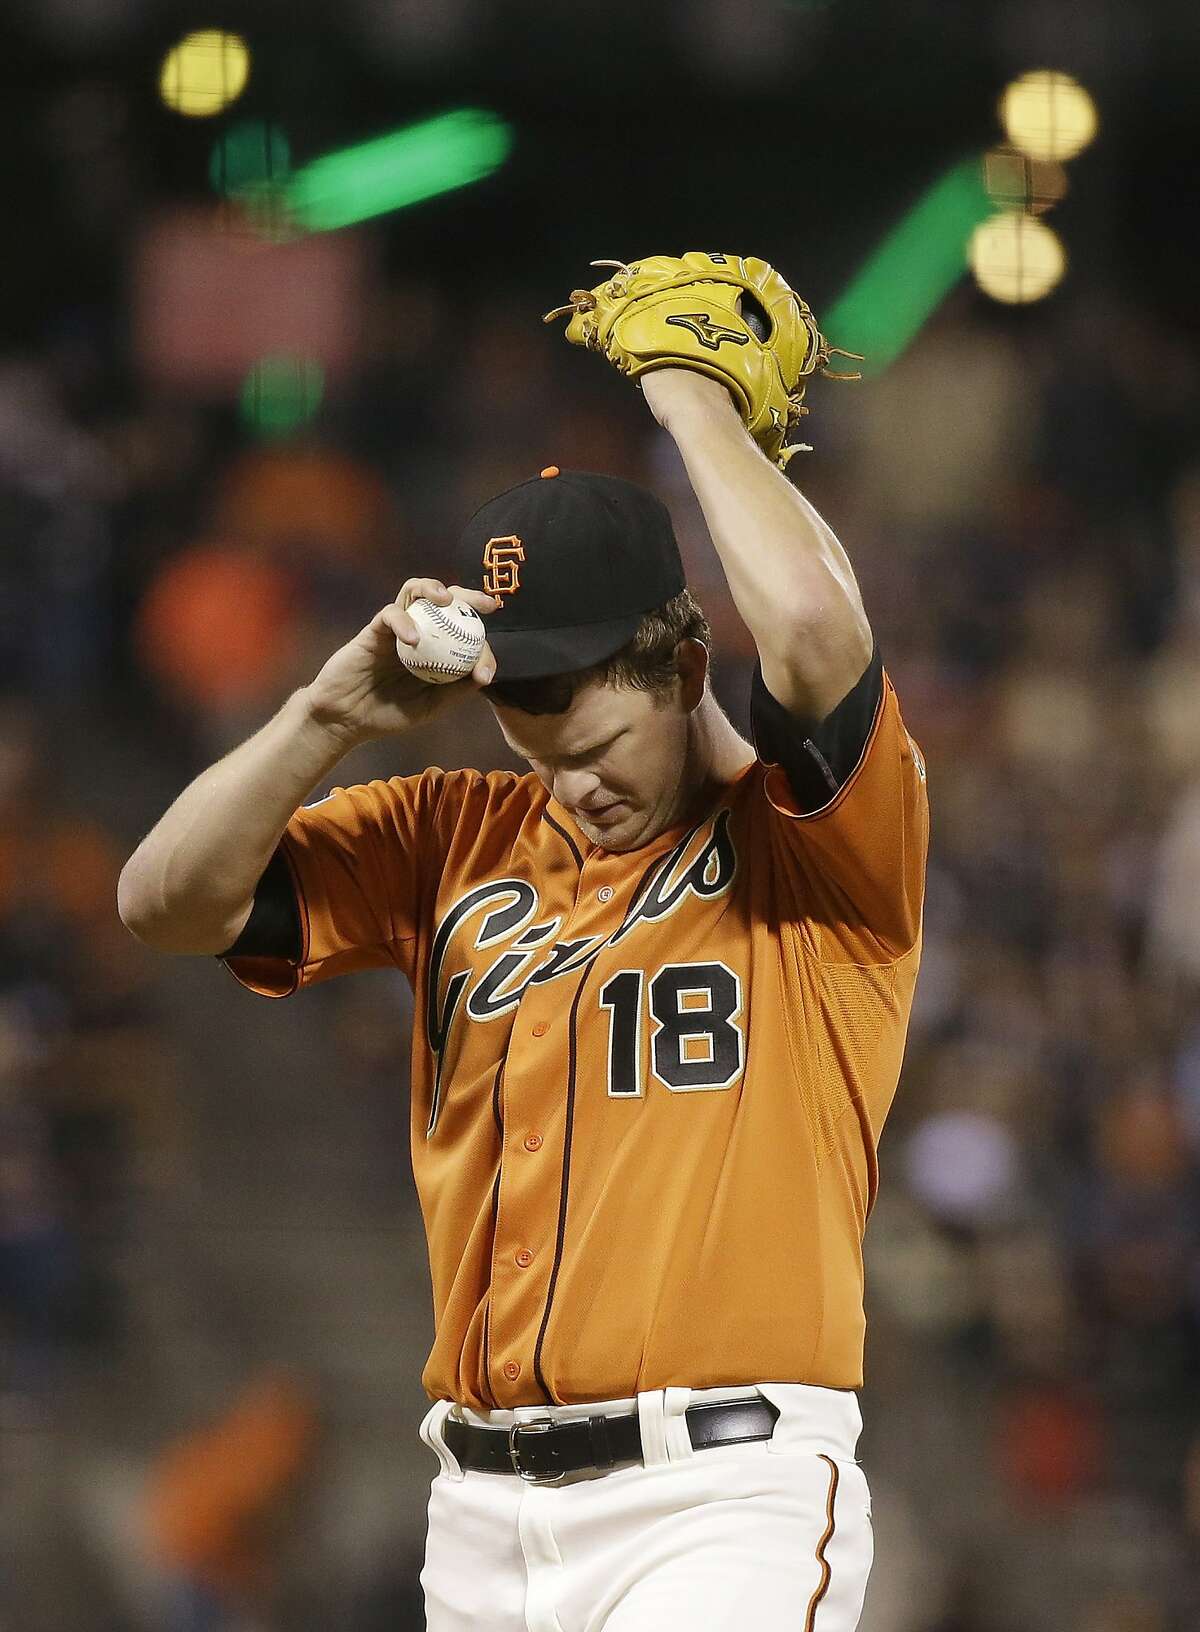 Matt Cain forced to skip start for San Francisco Giants after